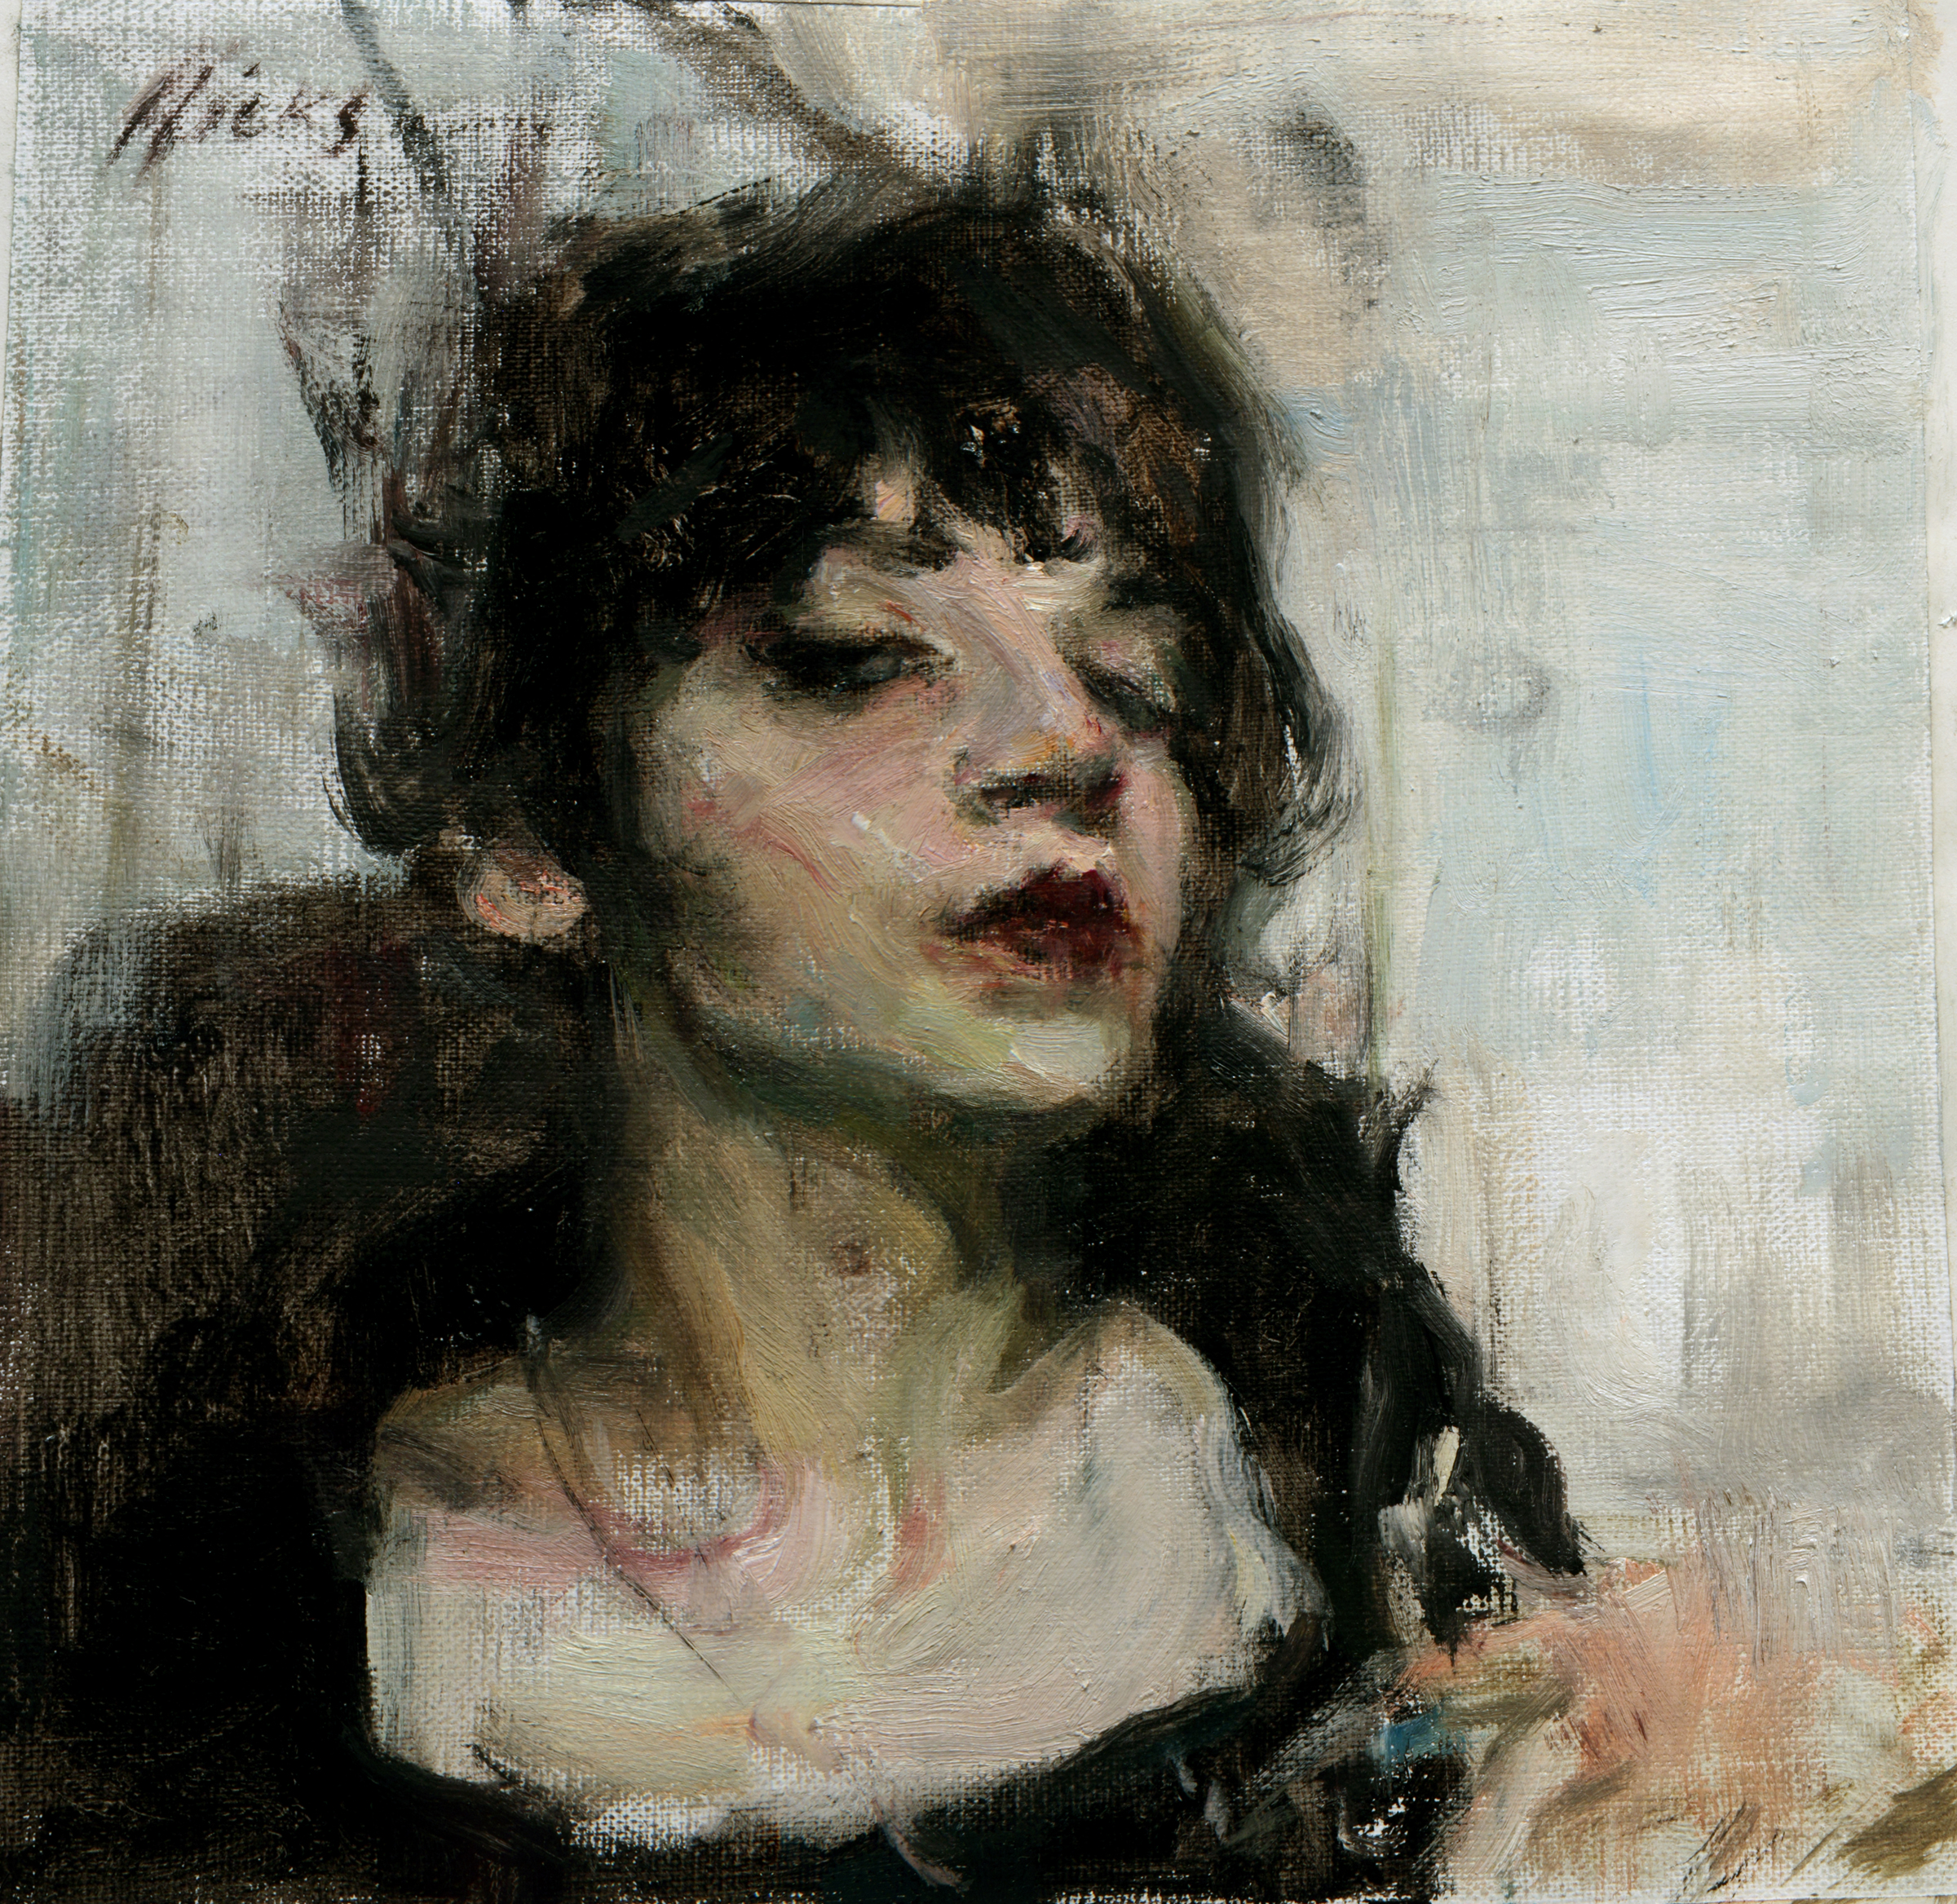 Contemporary realism portrait painting - Ron Hicks, "As If," 8 x 8 inches, Oil on linen